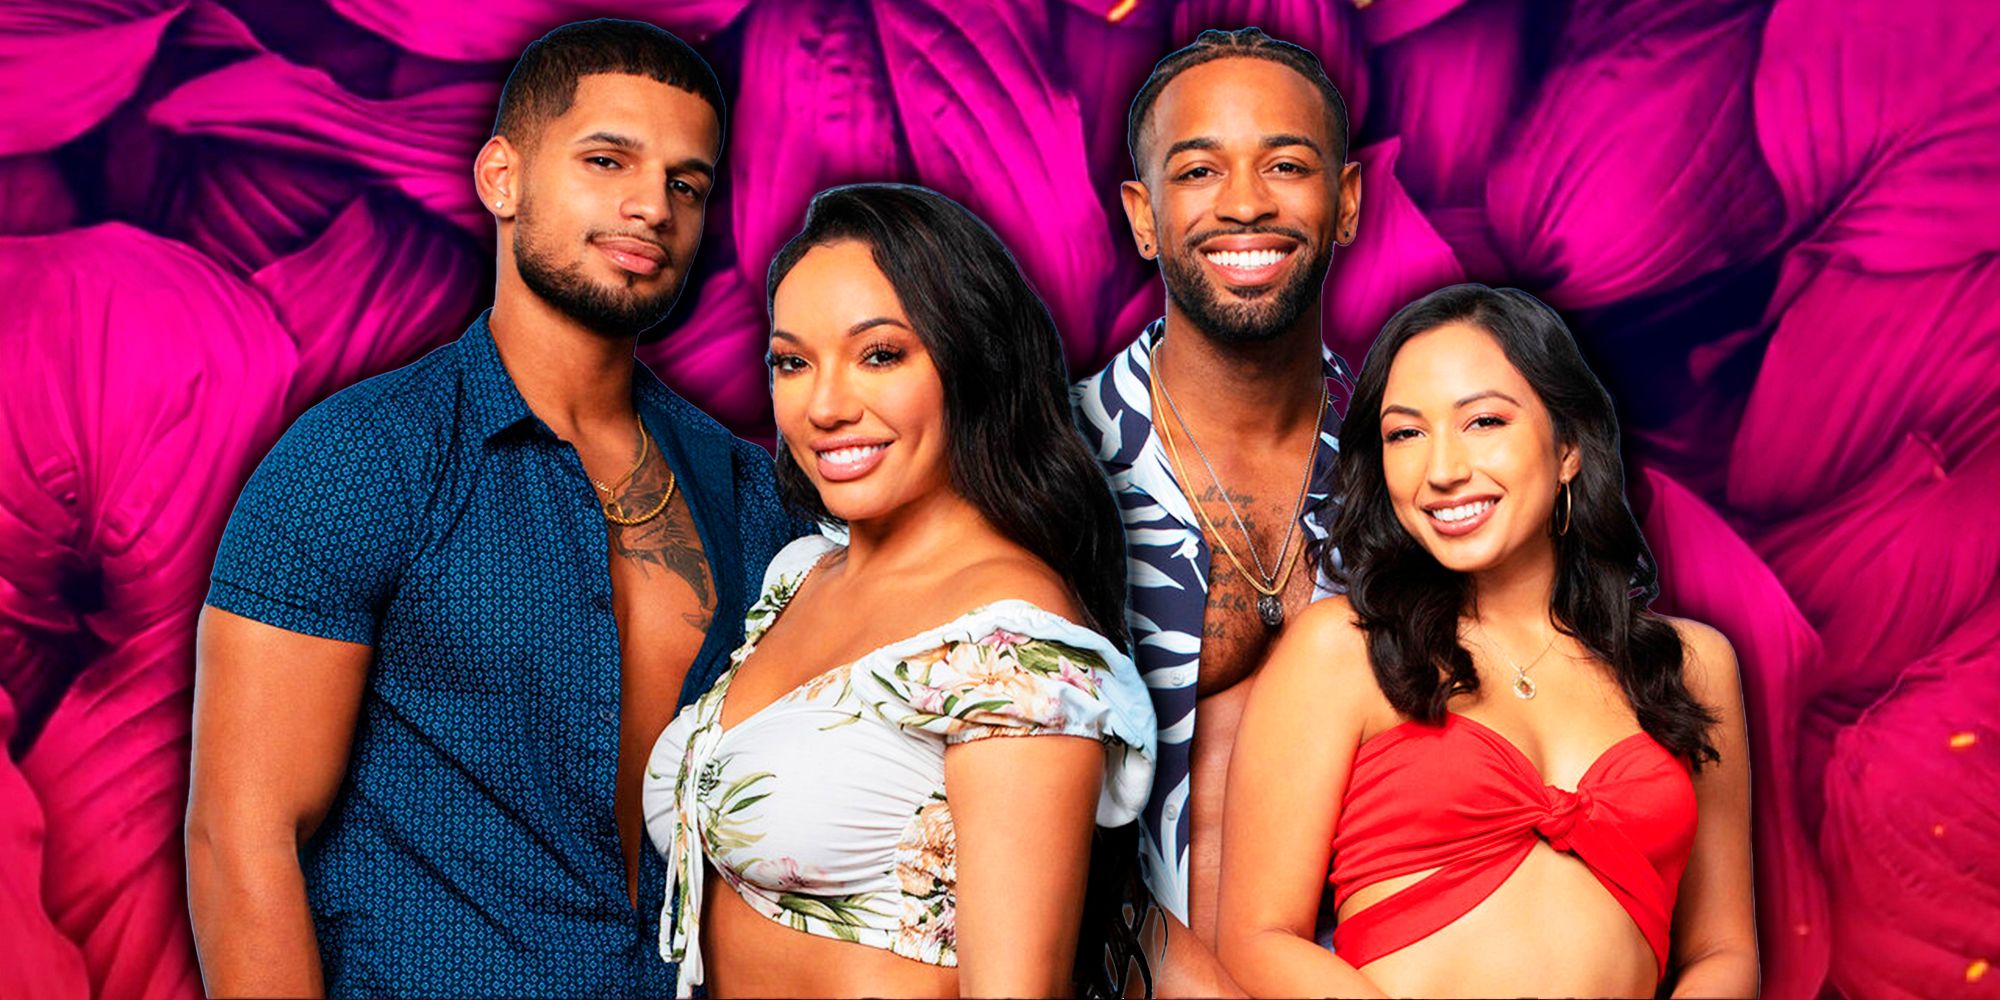 How To Watch Temptation Island Season 5 & What Time It Premieres